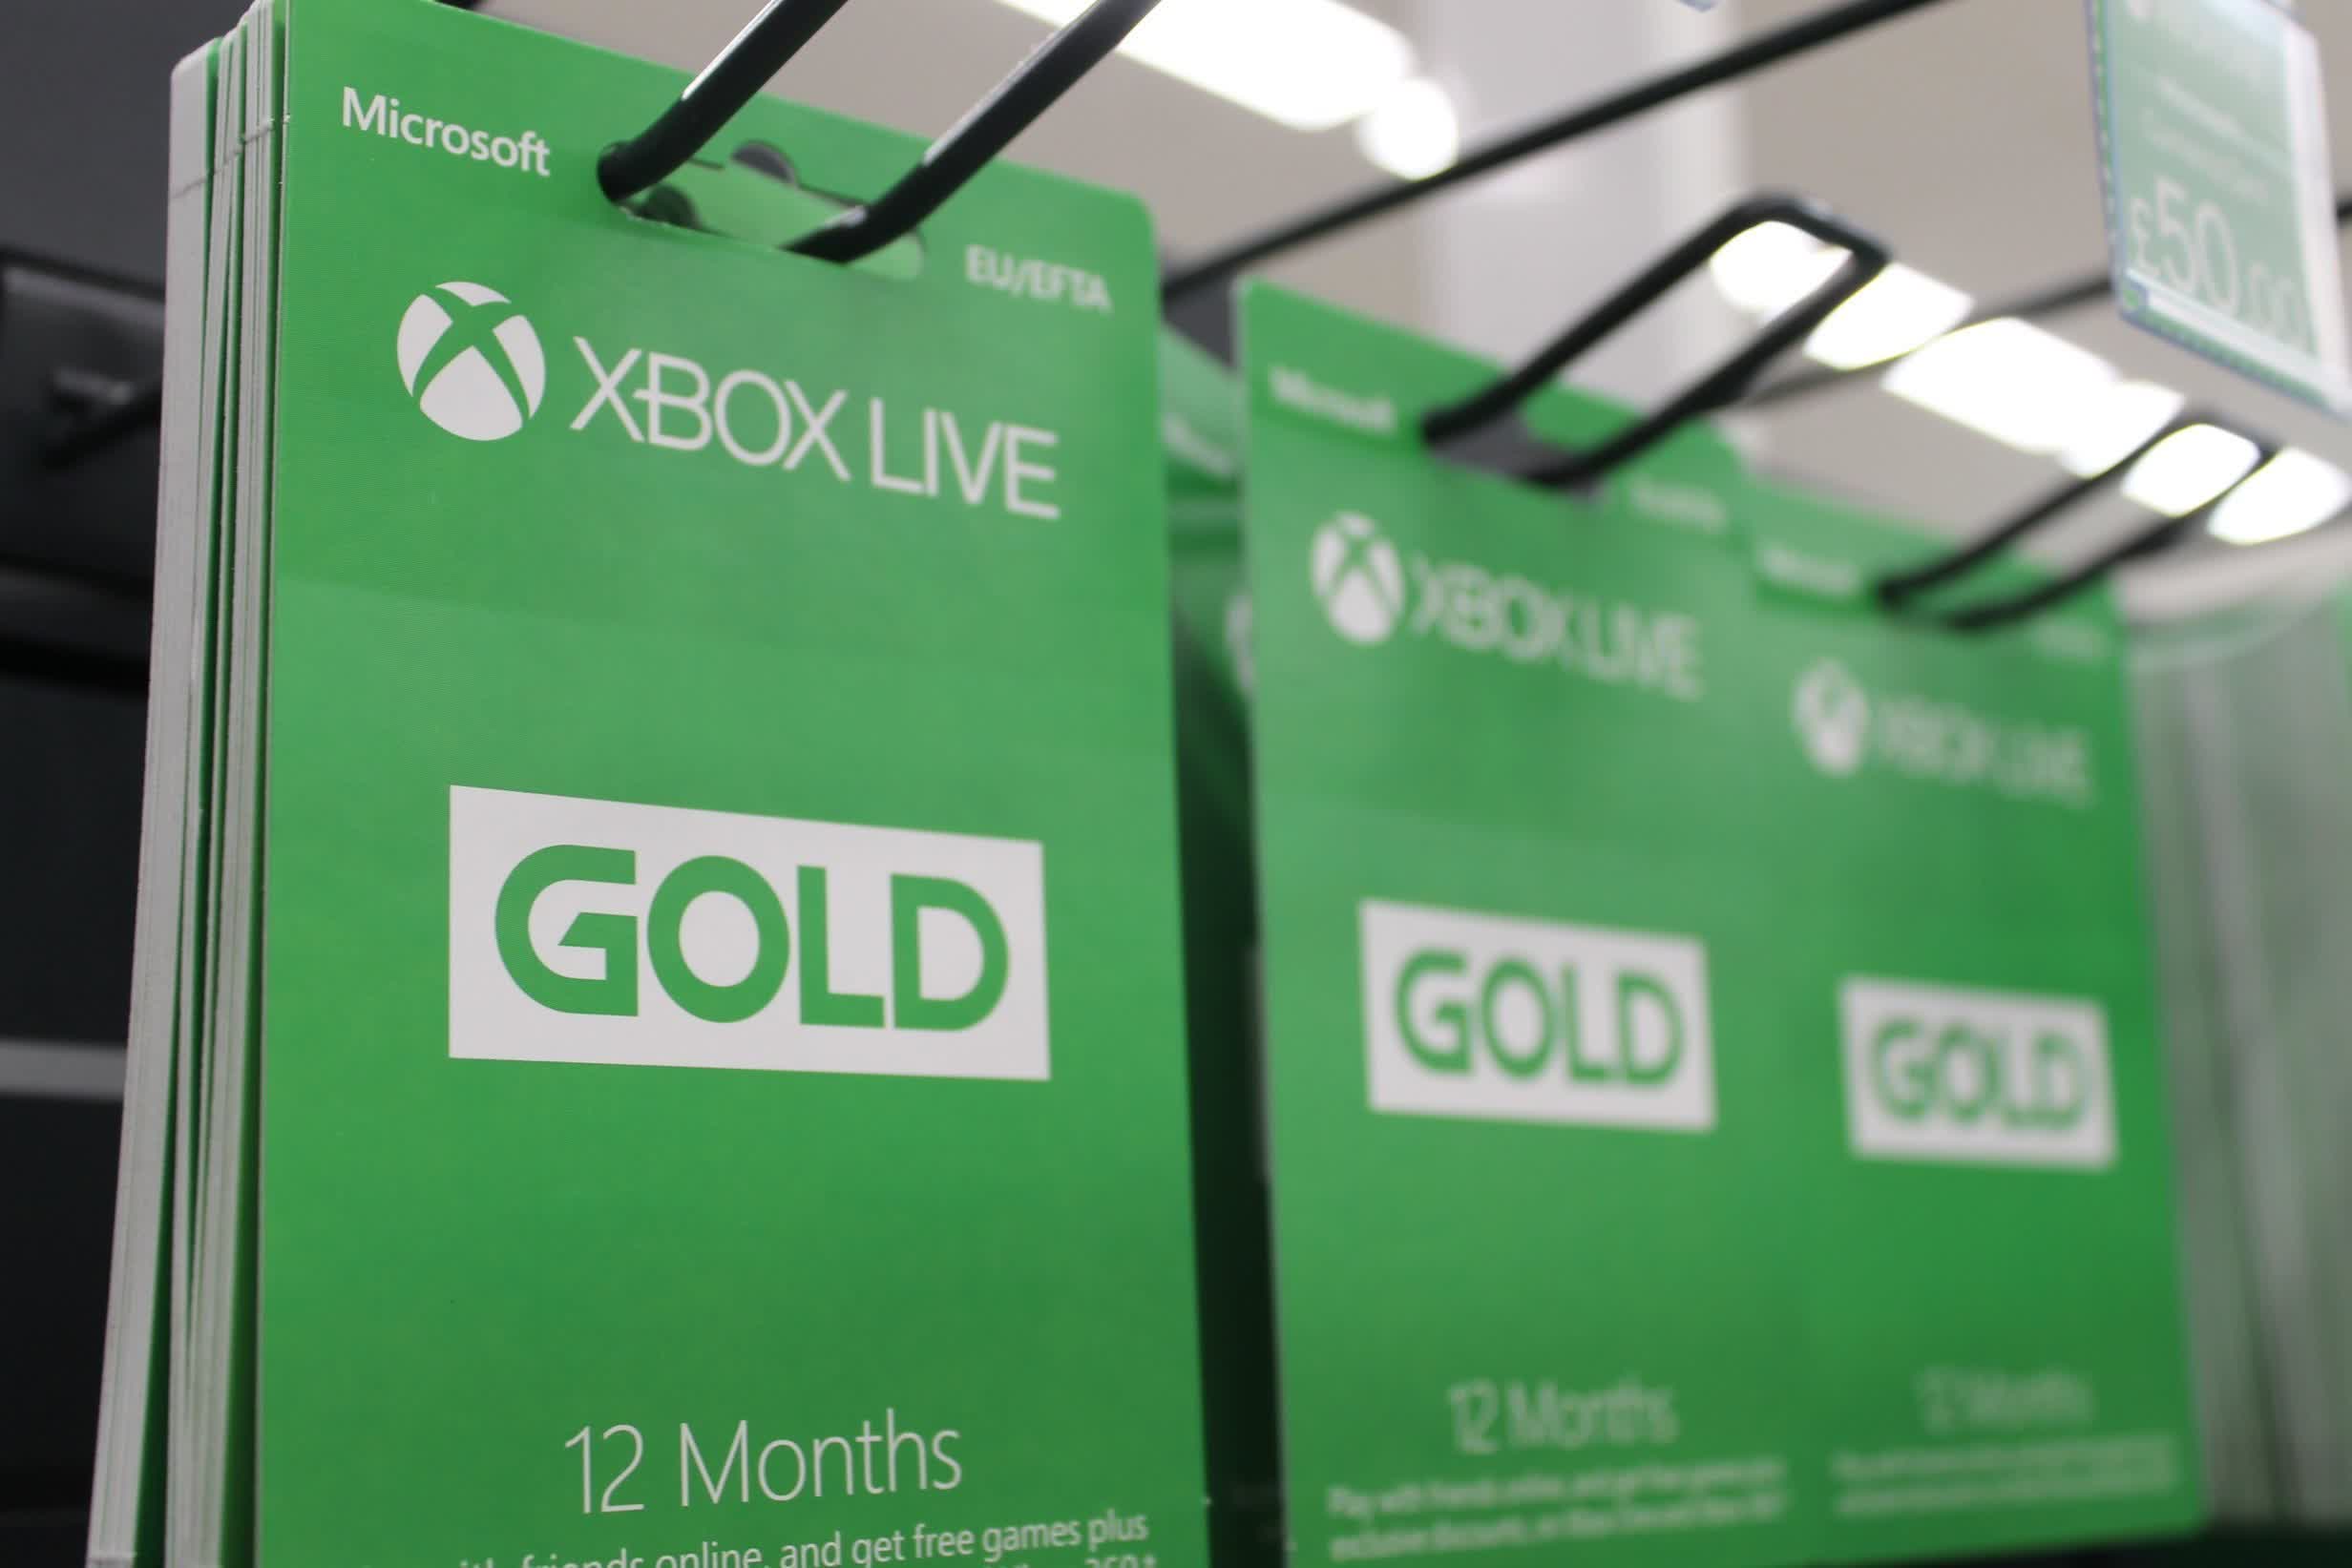 Xbox Live Gold will soon stop offering monthly Xbox 360 games